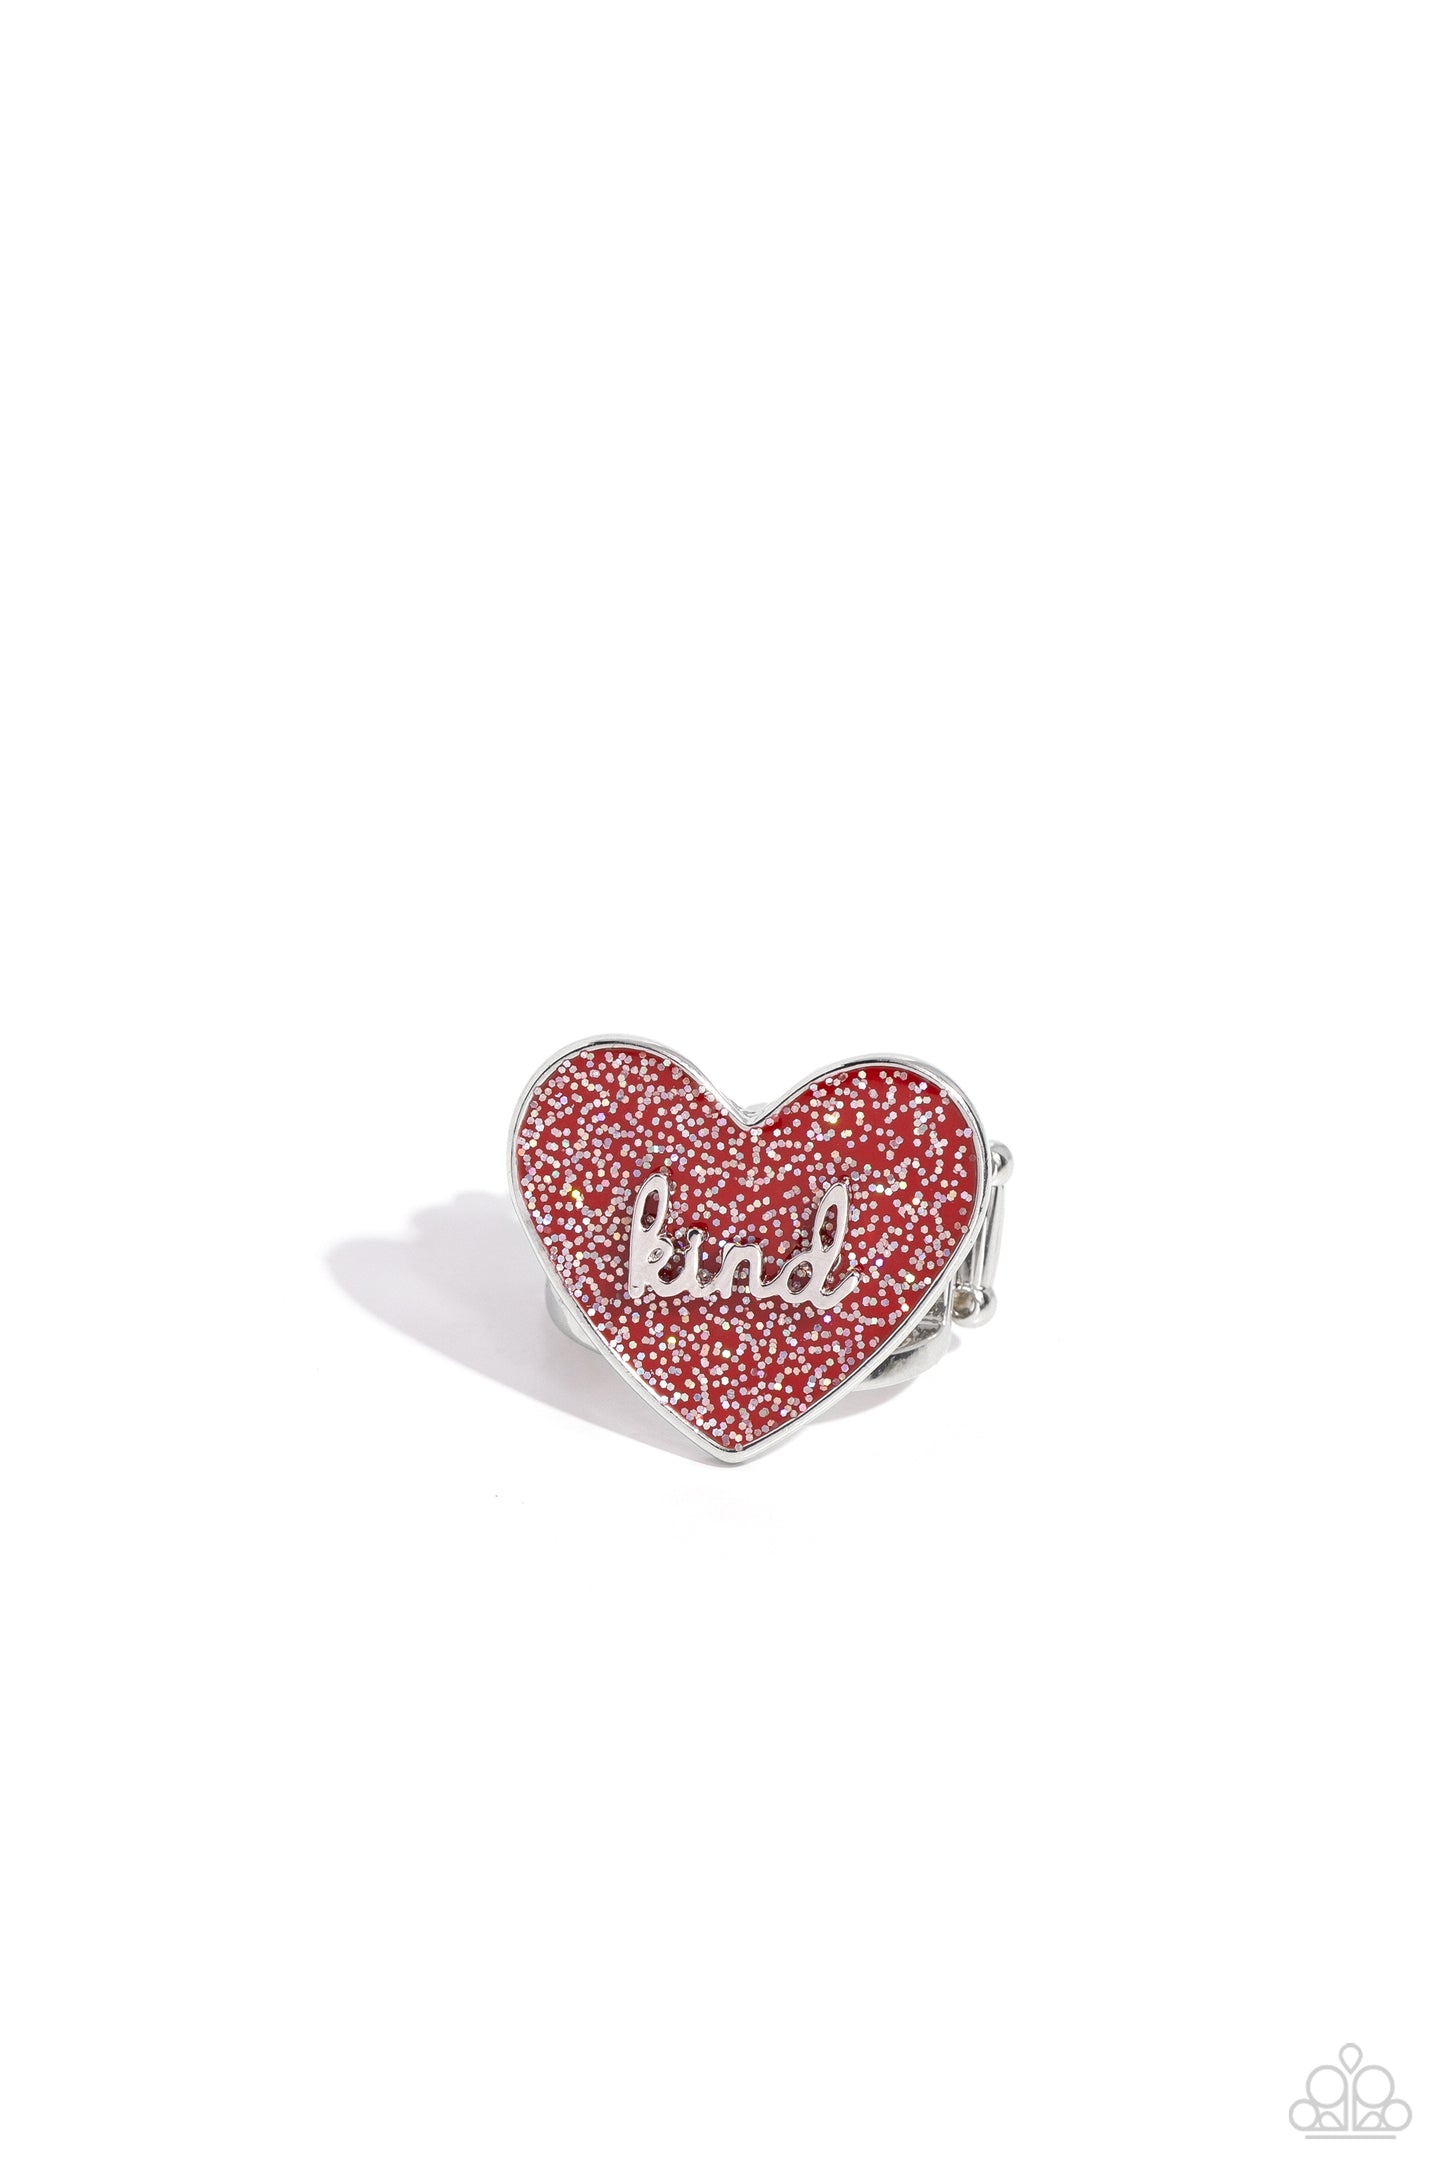 Compassionate Couture Red Ring - Paparazzi Accessories  Brushed in a glittery iridescent finish, a red heart frame rests atop airy silver bands for a retro glamorous look. The word "kind" is centered atop the heart frame for an optimistic finish. Features a stretchy band for a flexible fit.  Sold as one individual ring.  P4WD-RDXX-063XX